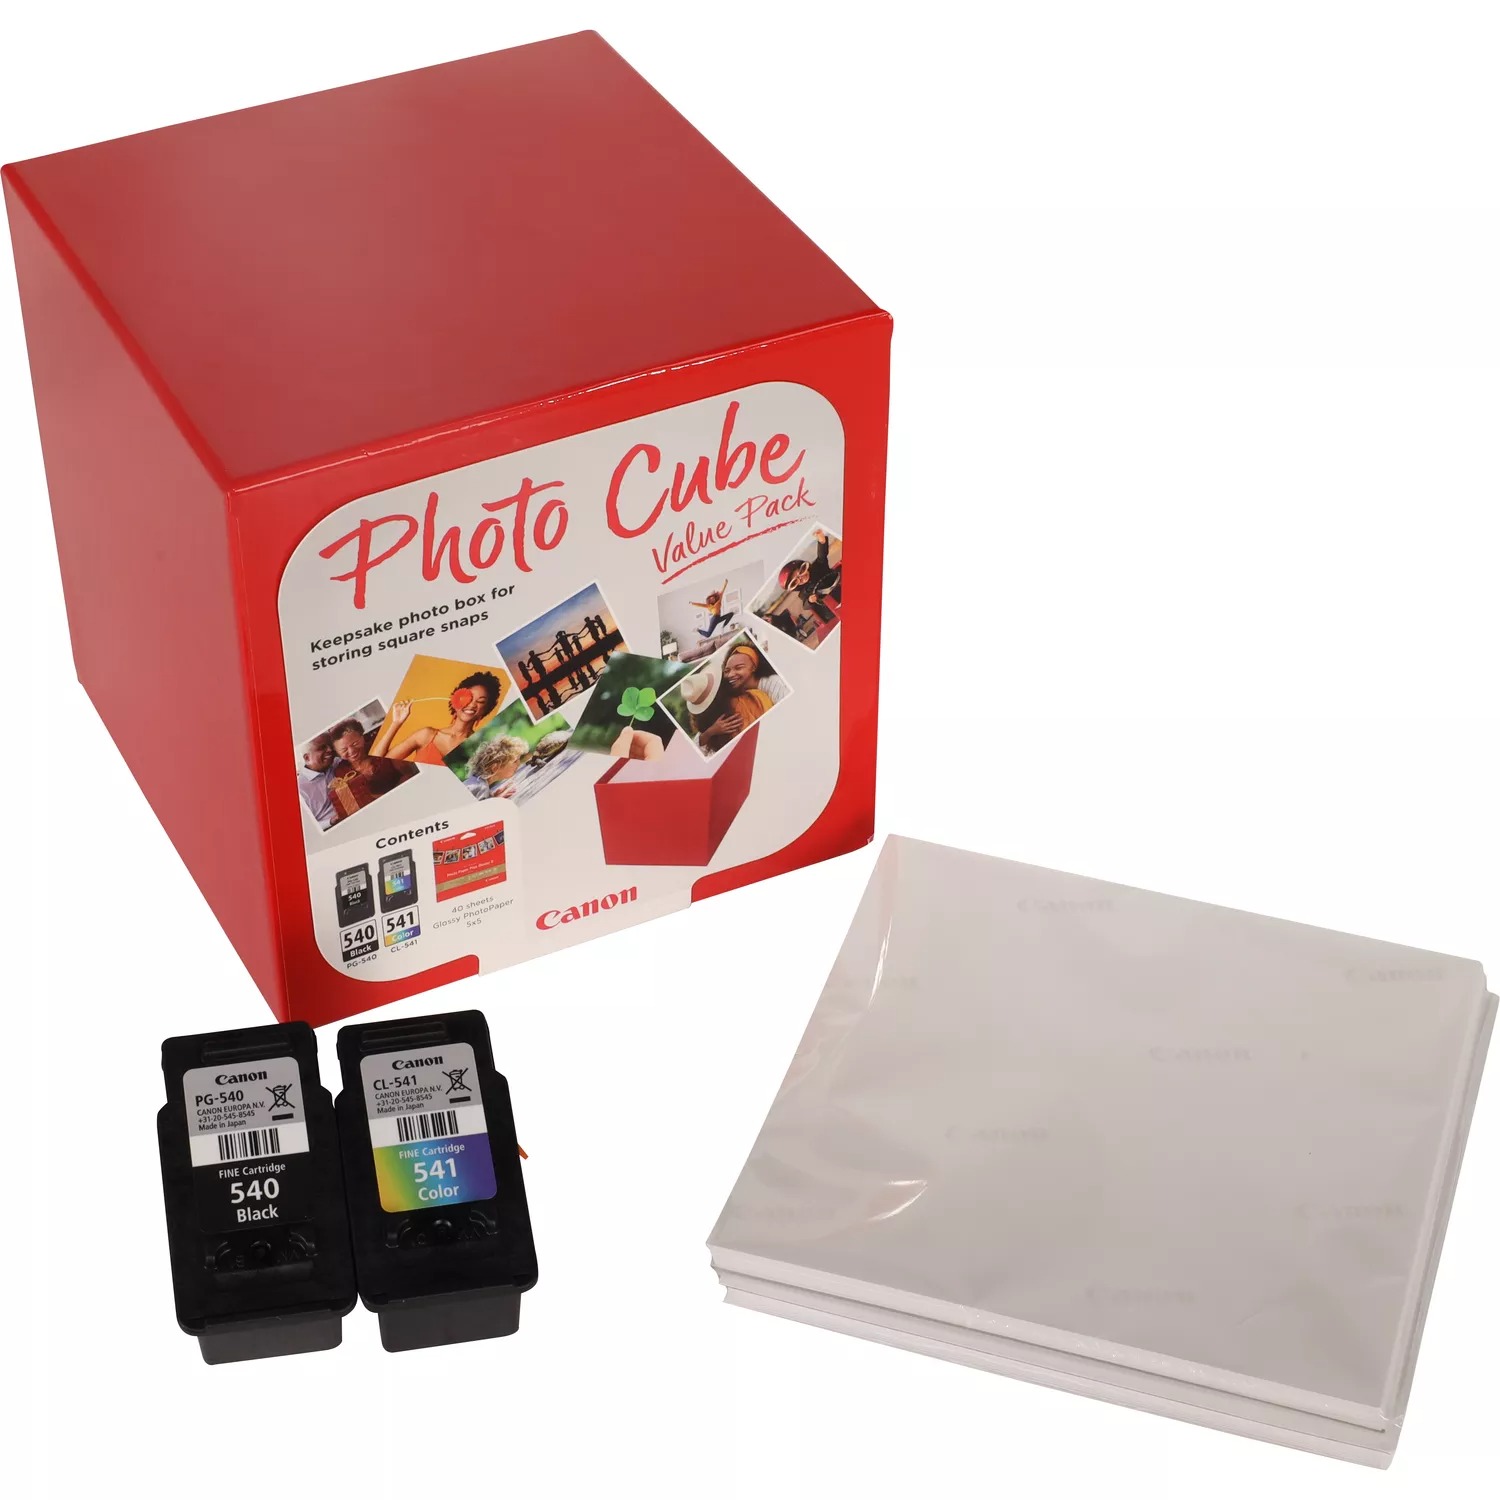 Original Canon PG-540 / CL-541 Photo Cube Ink Cartridges & Glossy Photo Paper Value Pack (5225B012)